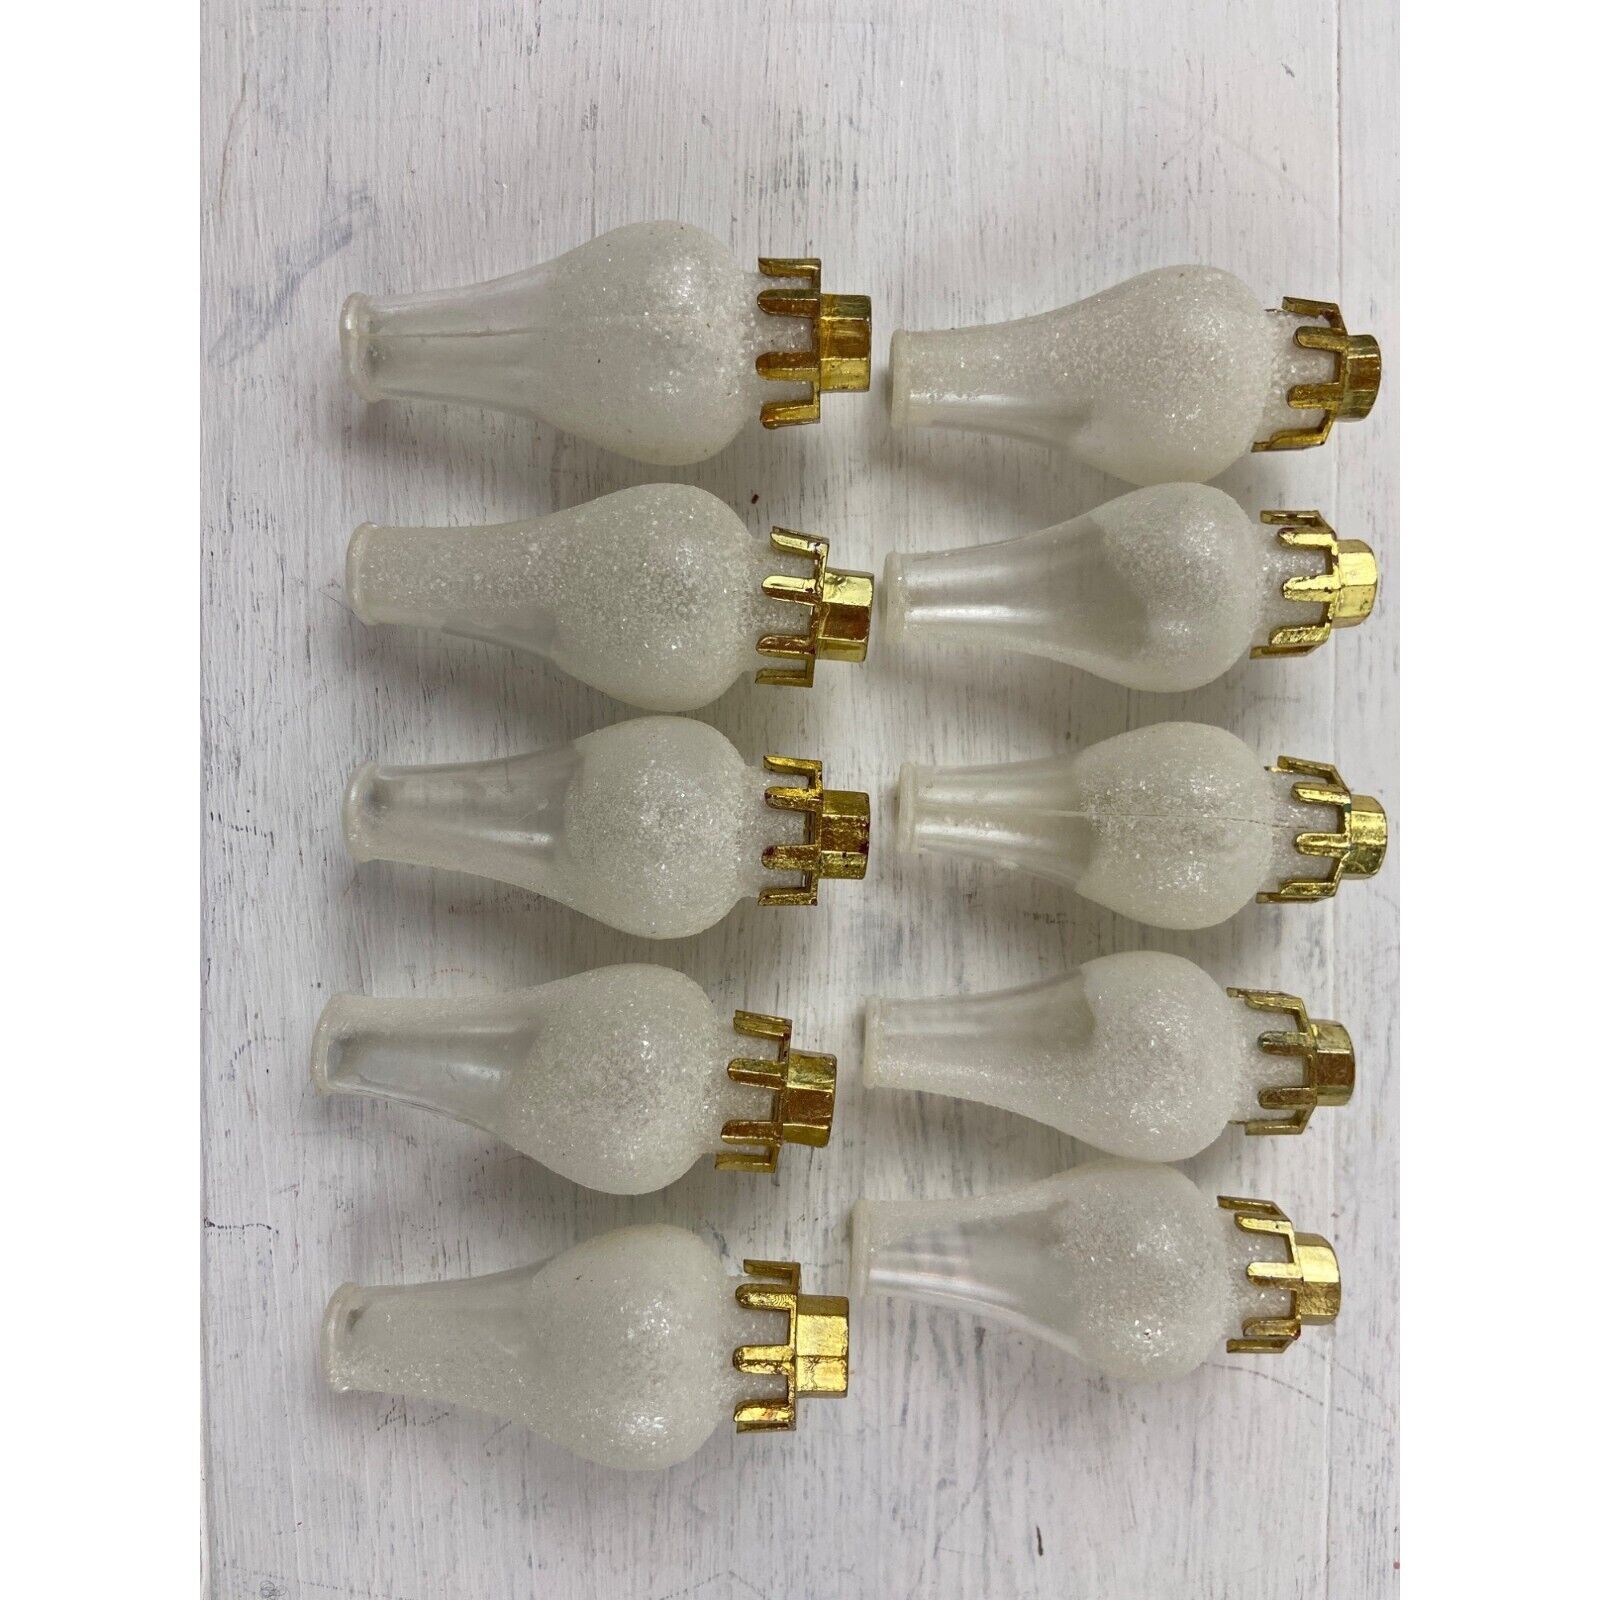 10 Vintage plastic string light replacement covers